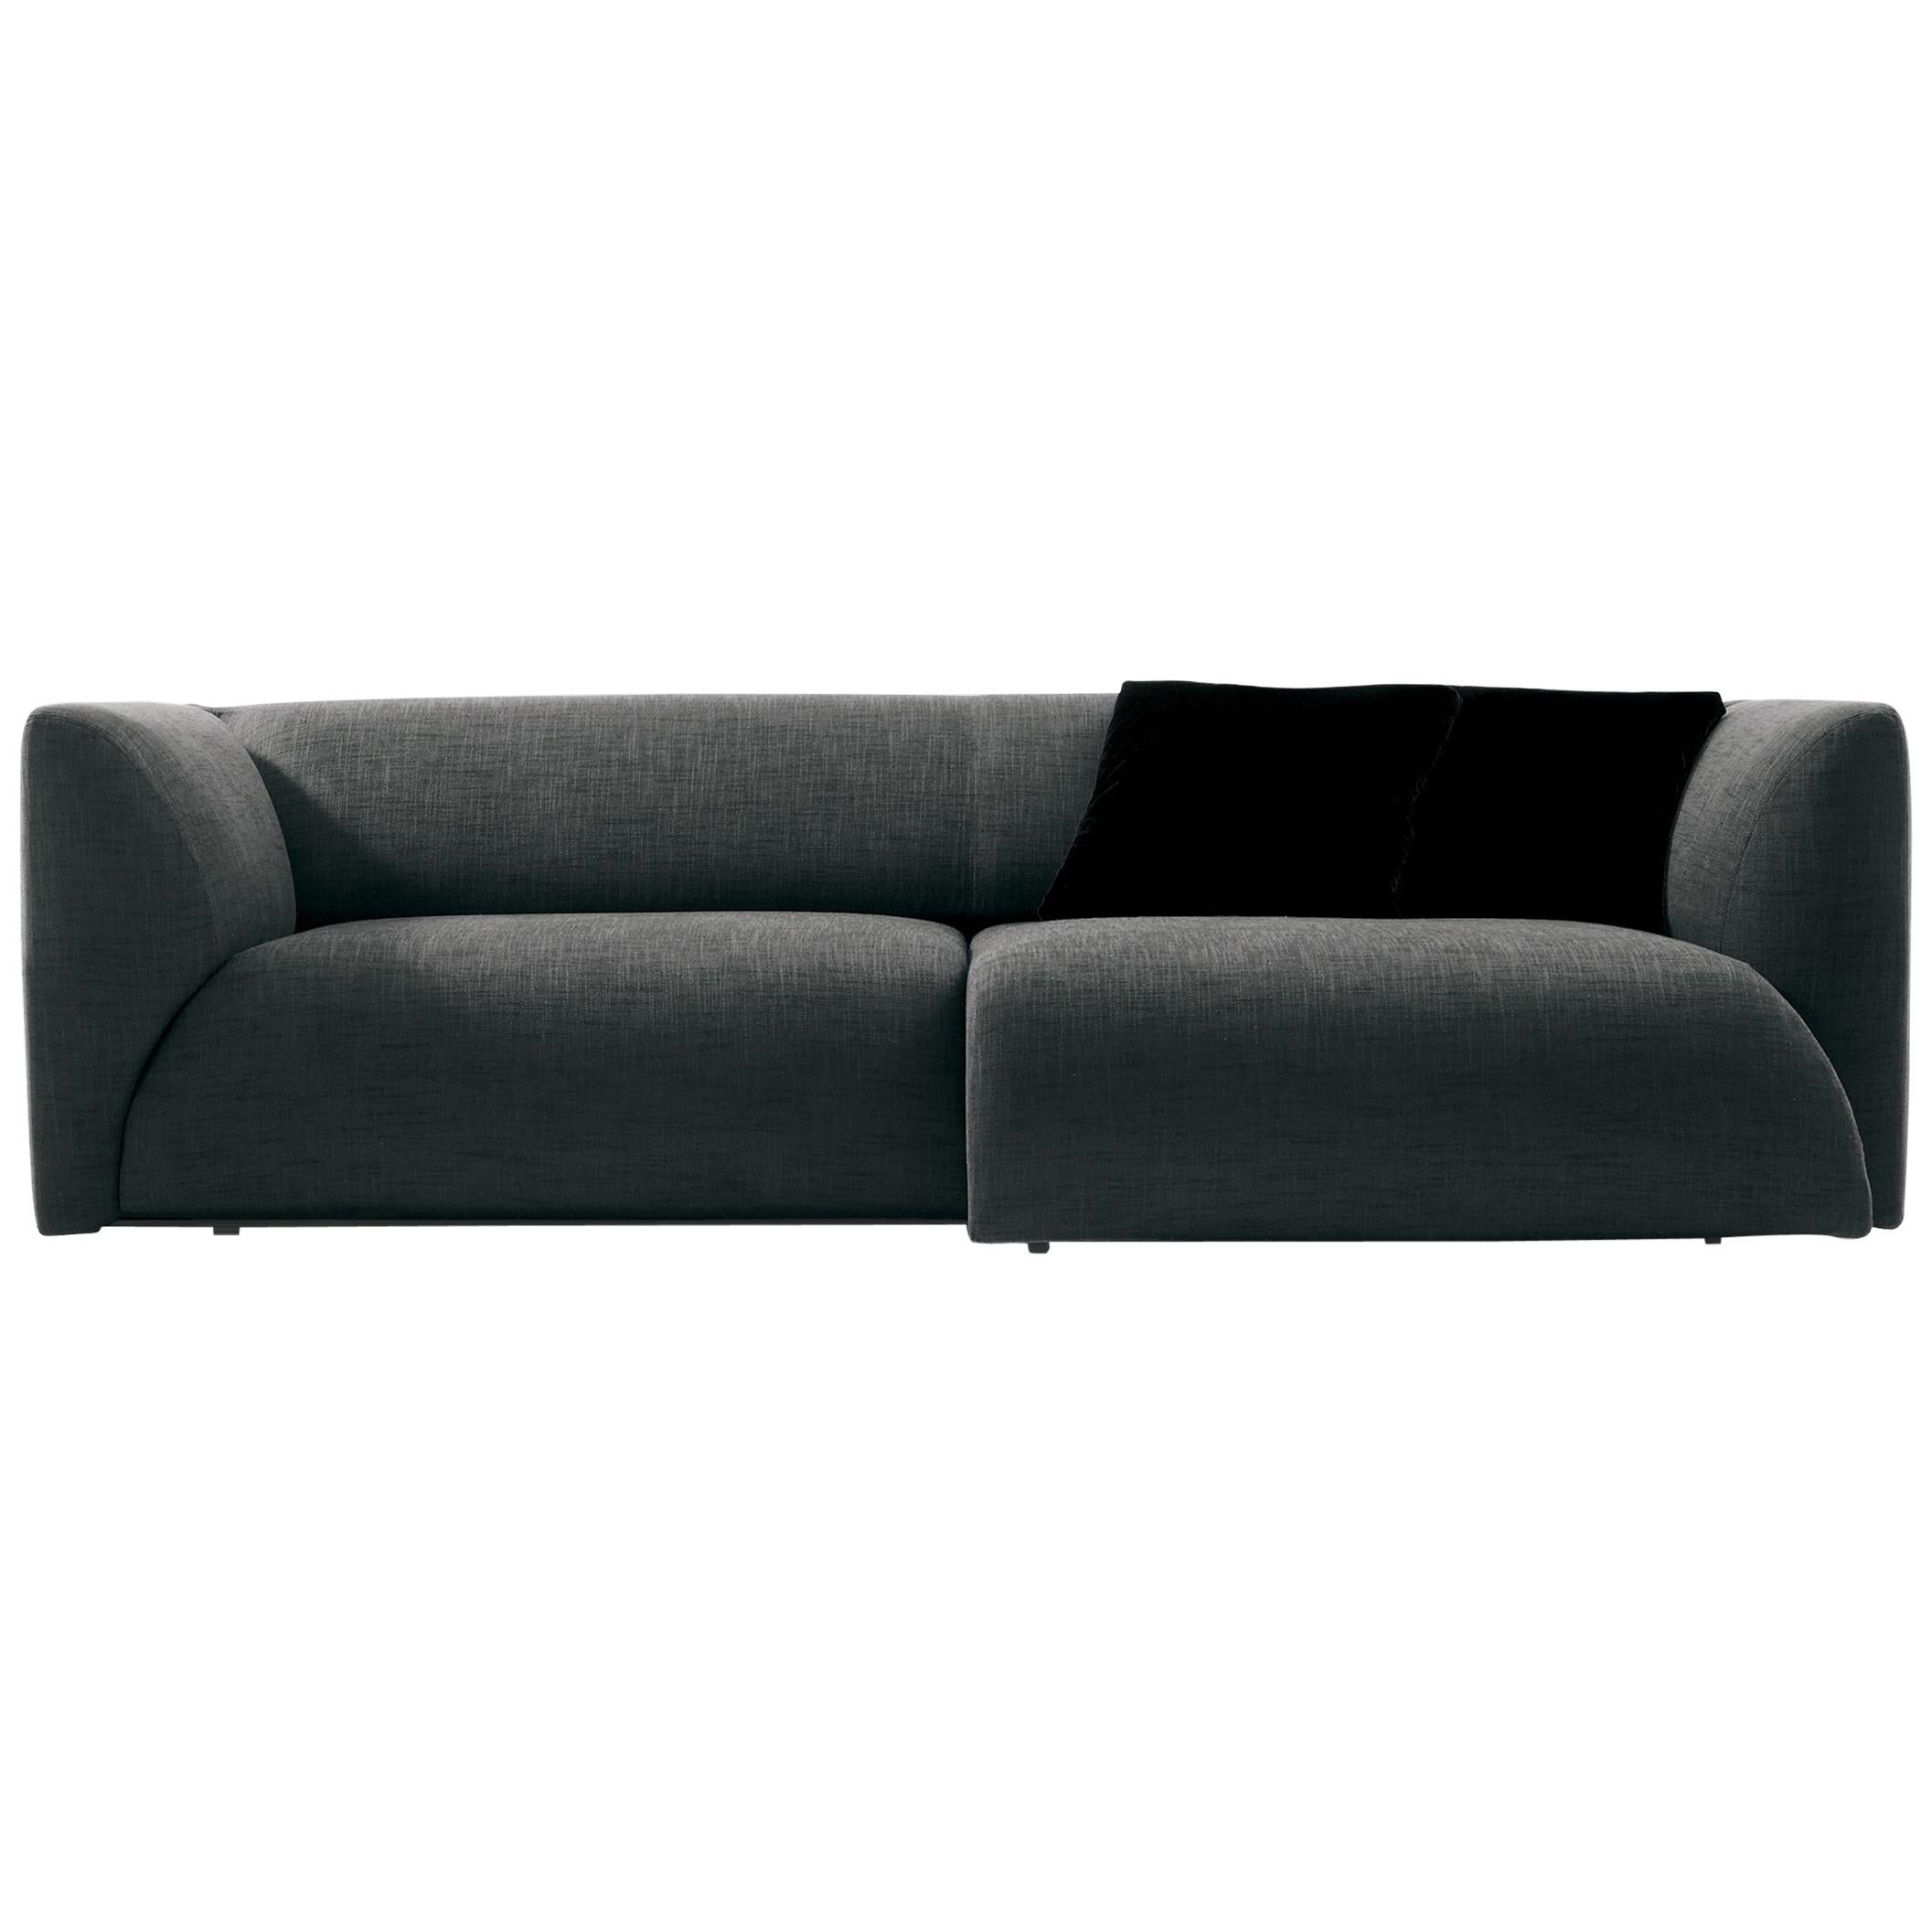 Nube Italia Sophie Sofa in Charcoal Grey Upholstery by Mario Ferrarini For Sale